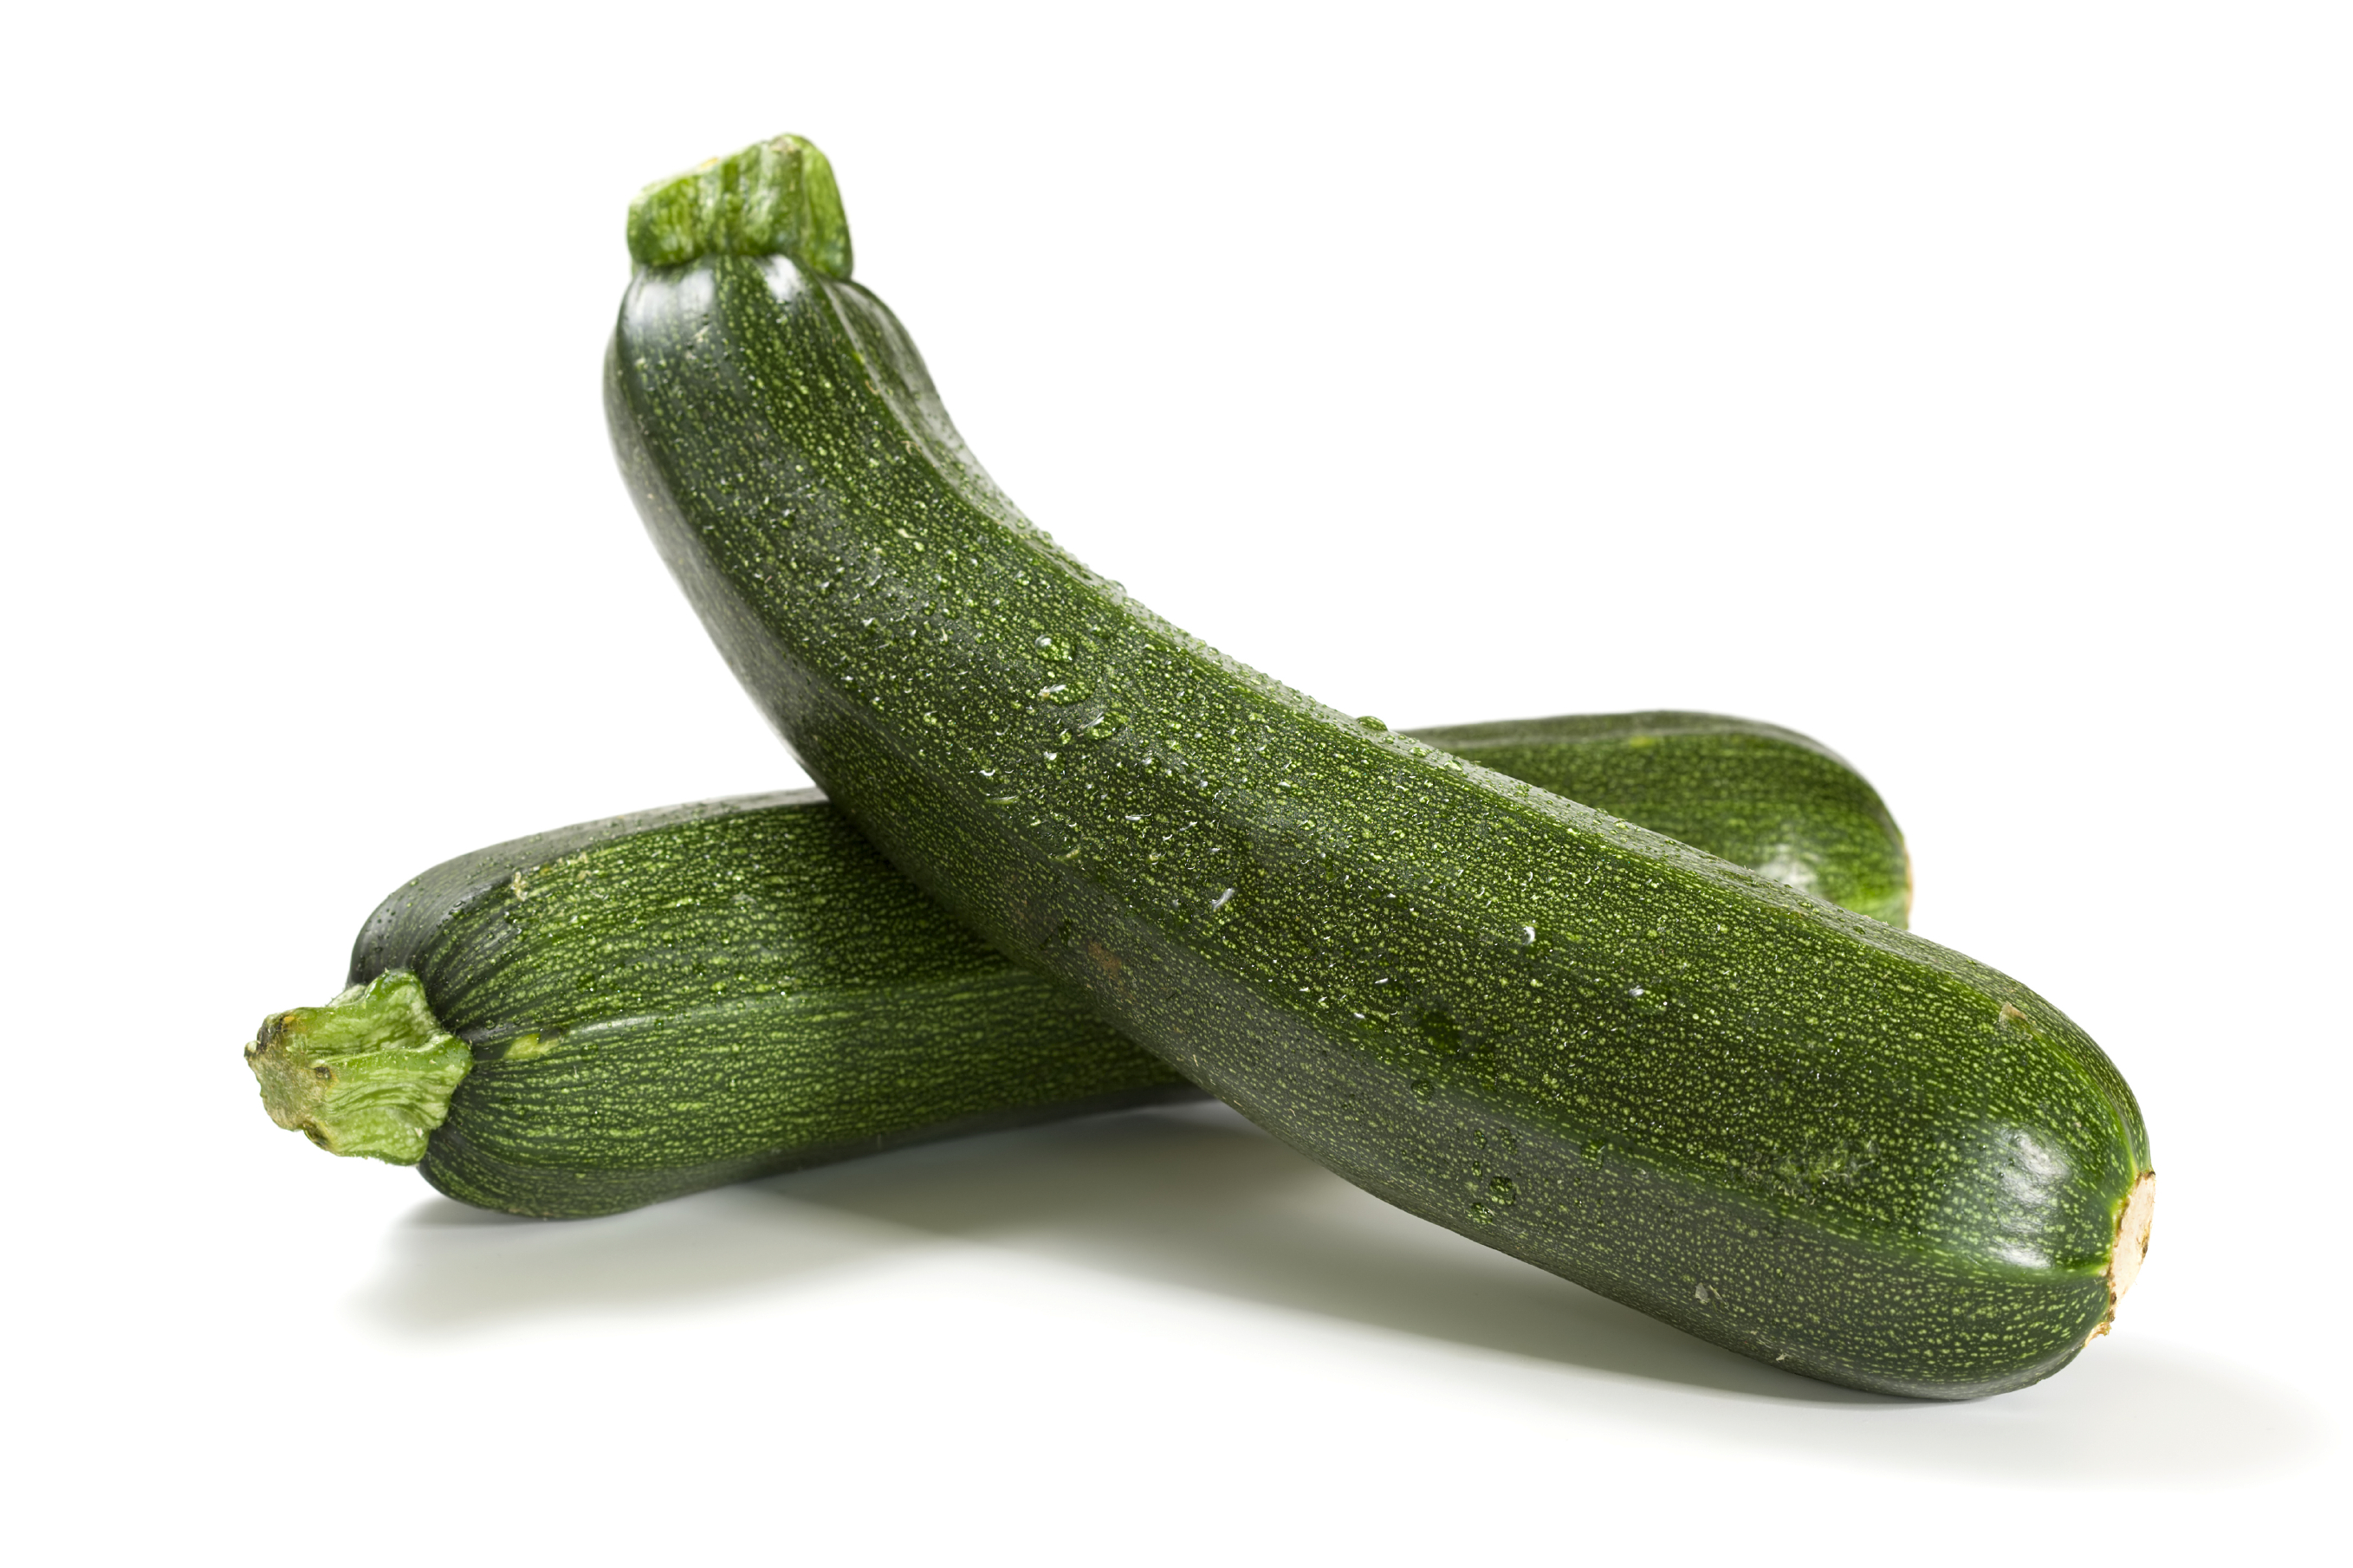 Green Squash… Zucchini, What’s the Difference?